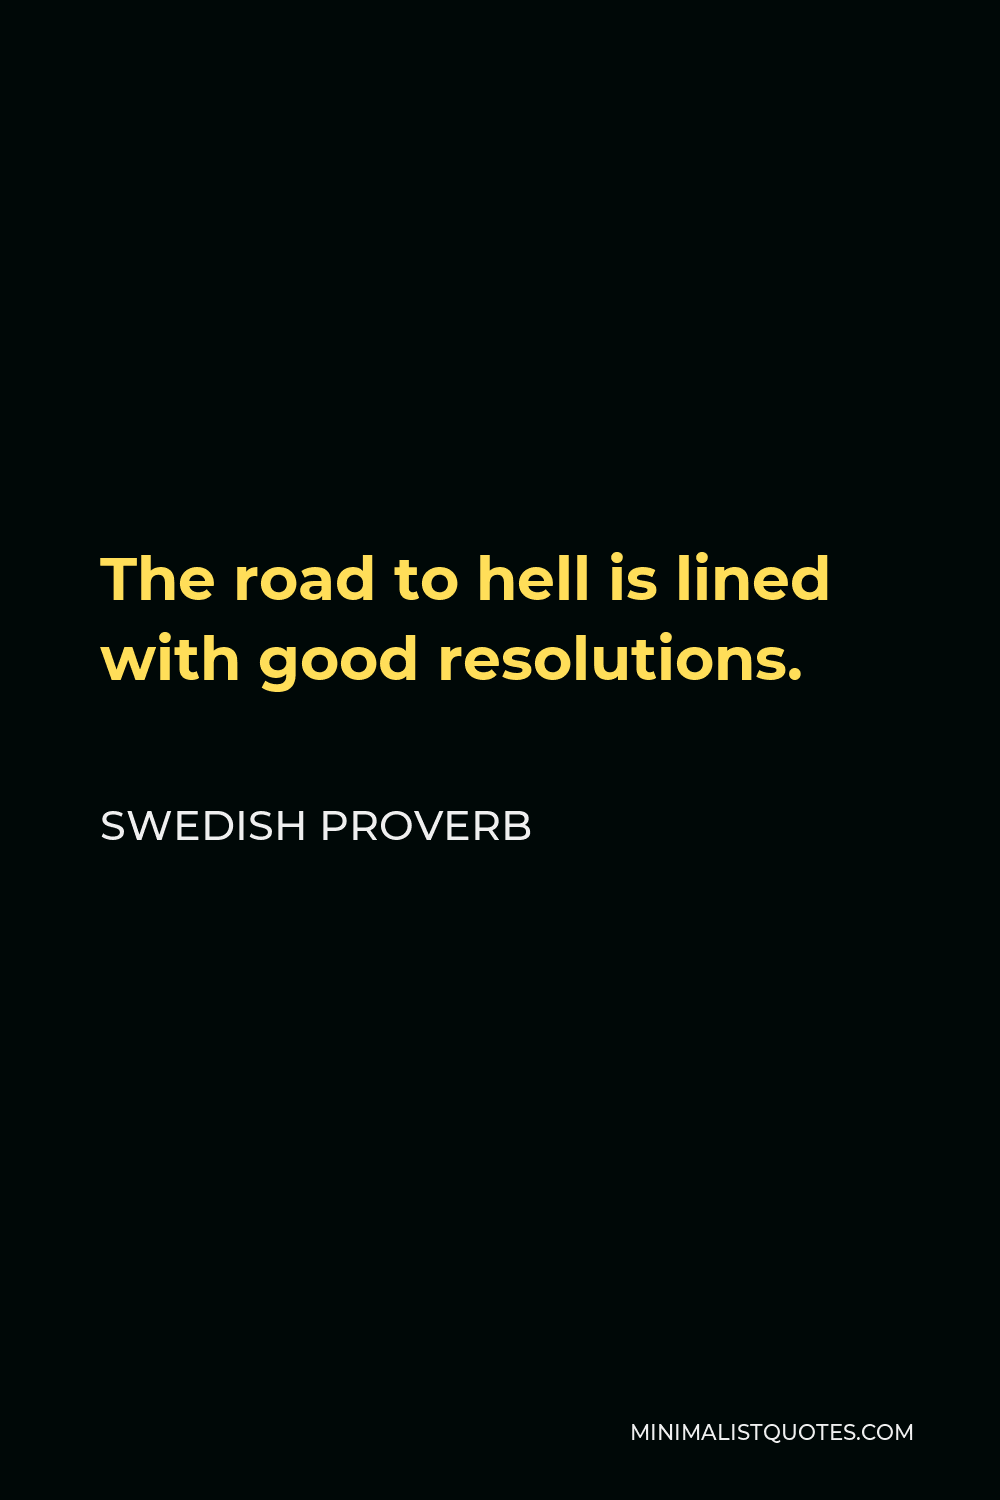 Swedish Proverb Quote - The road to hell is lined with good resolutions.